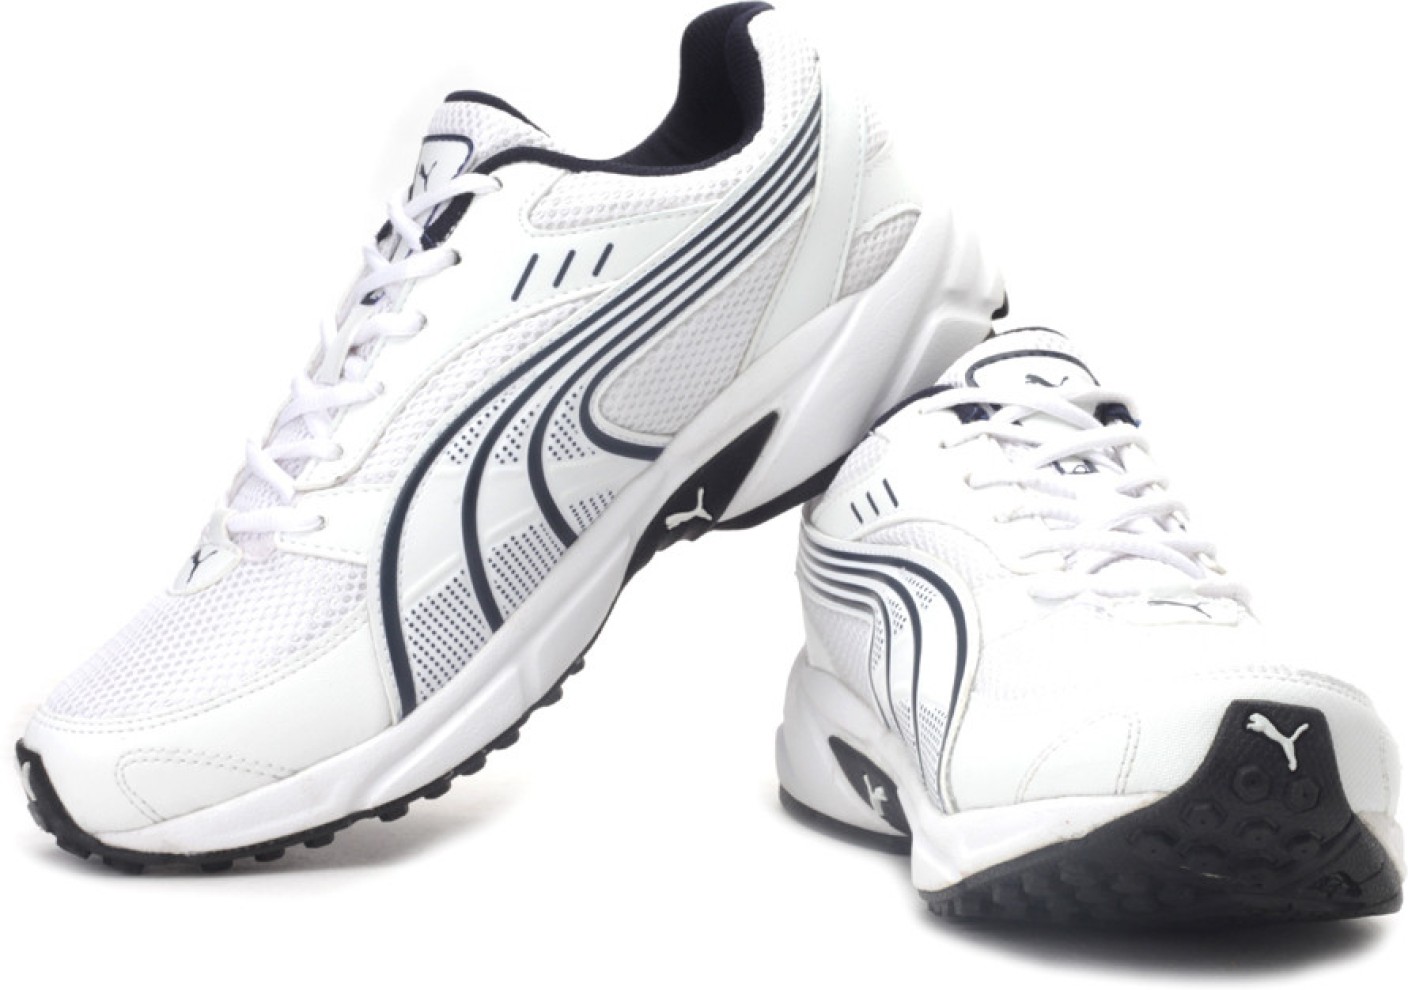 Puma Atom Ind. Running Shoes For Men - Buy White, Insignia Blue Color ...